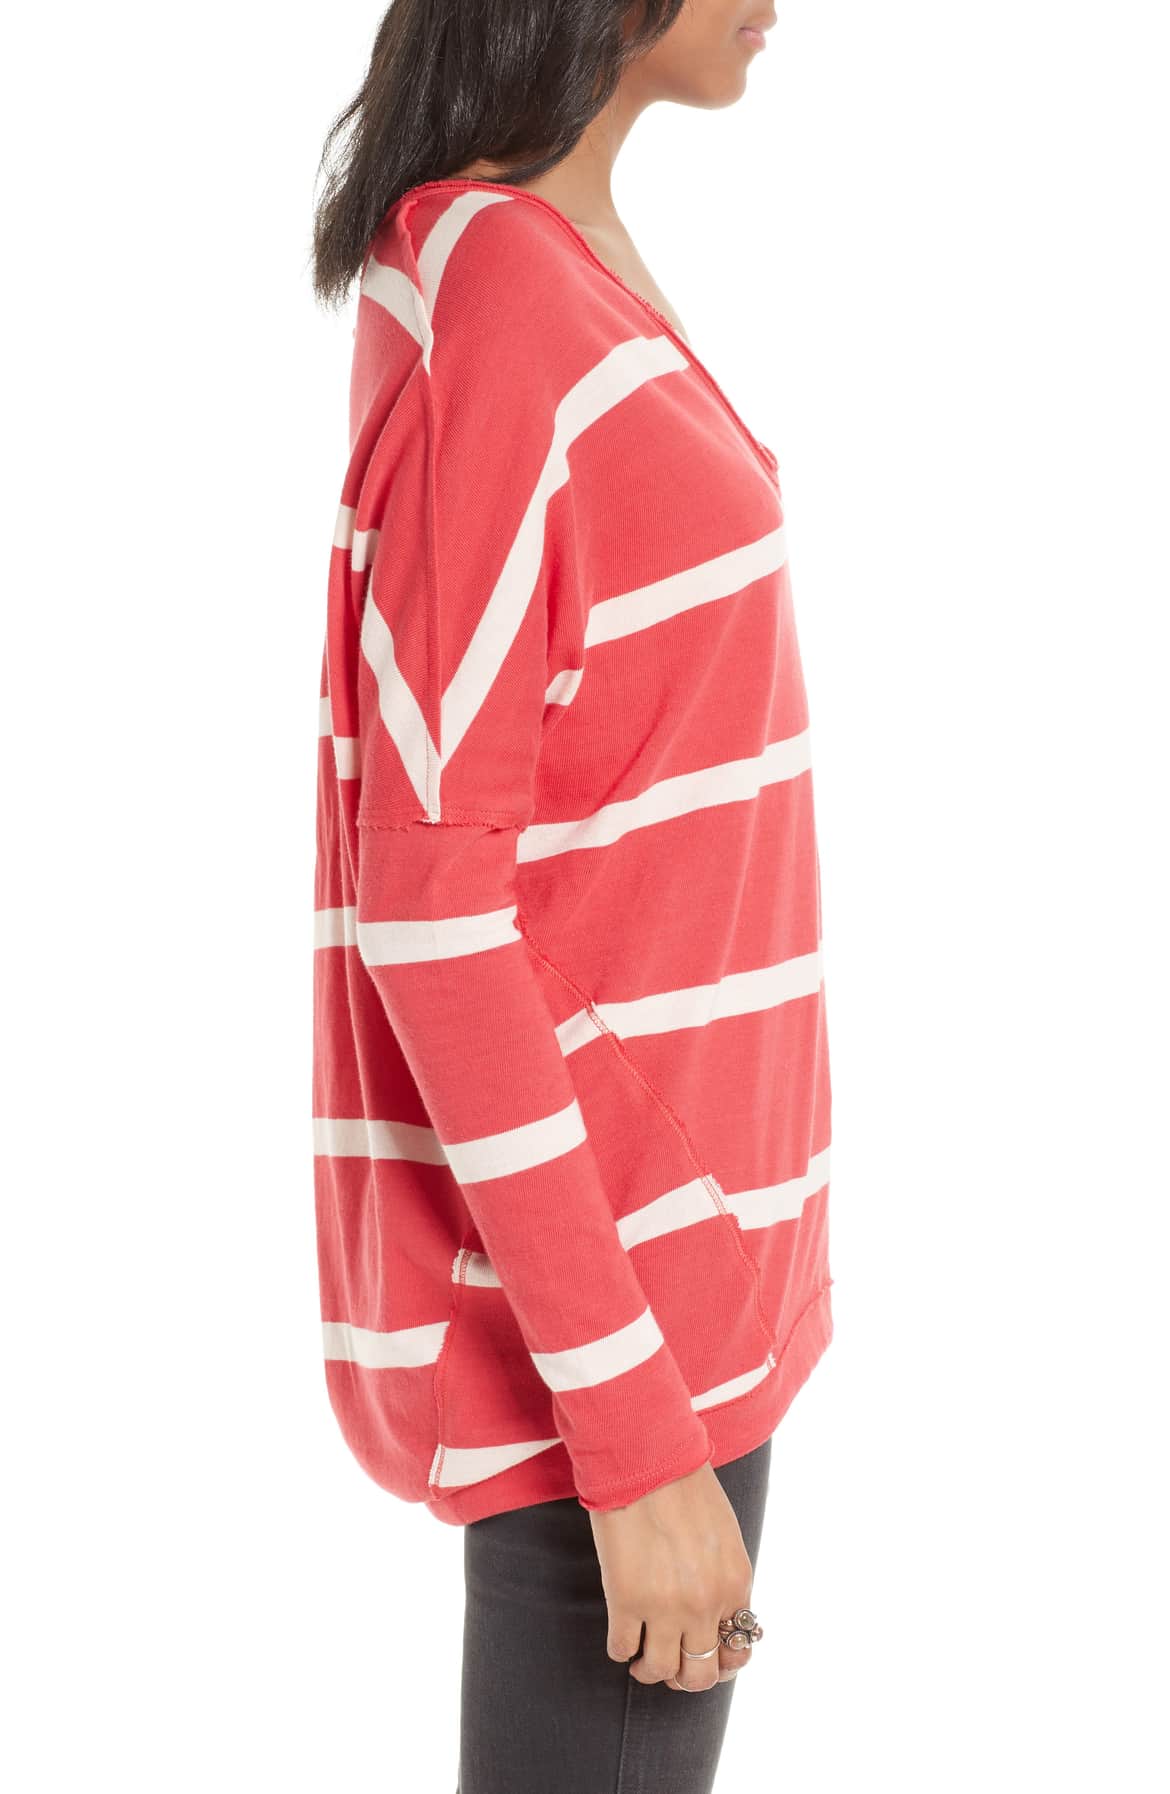 Free People Upstate Striped Long Sleeve Top Red - Gear Relapse 